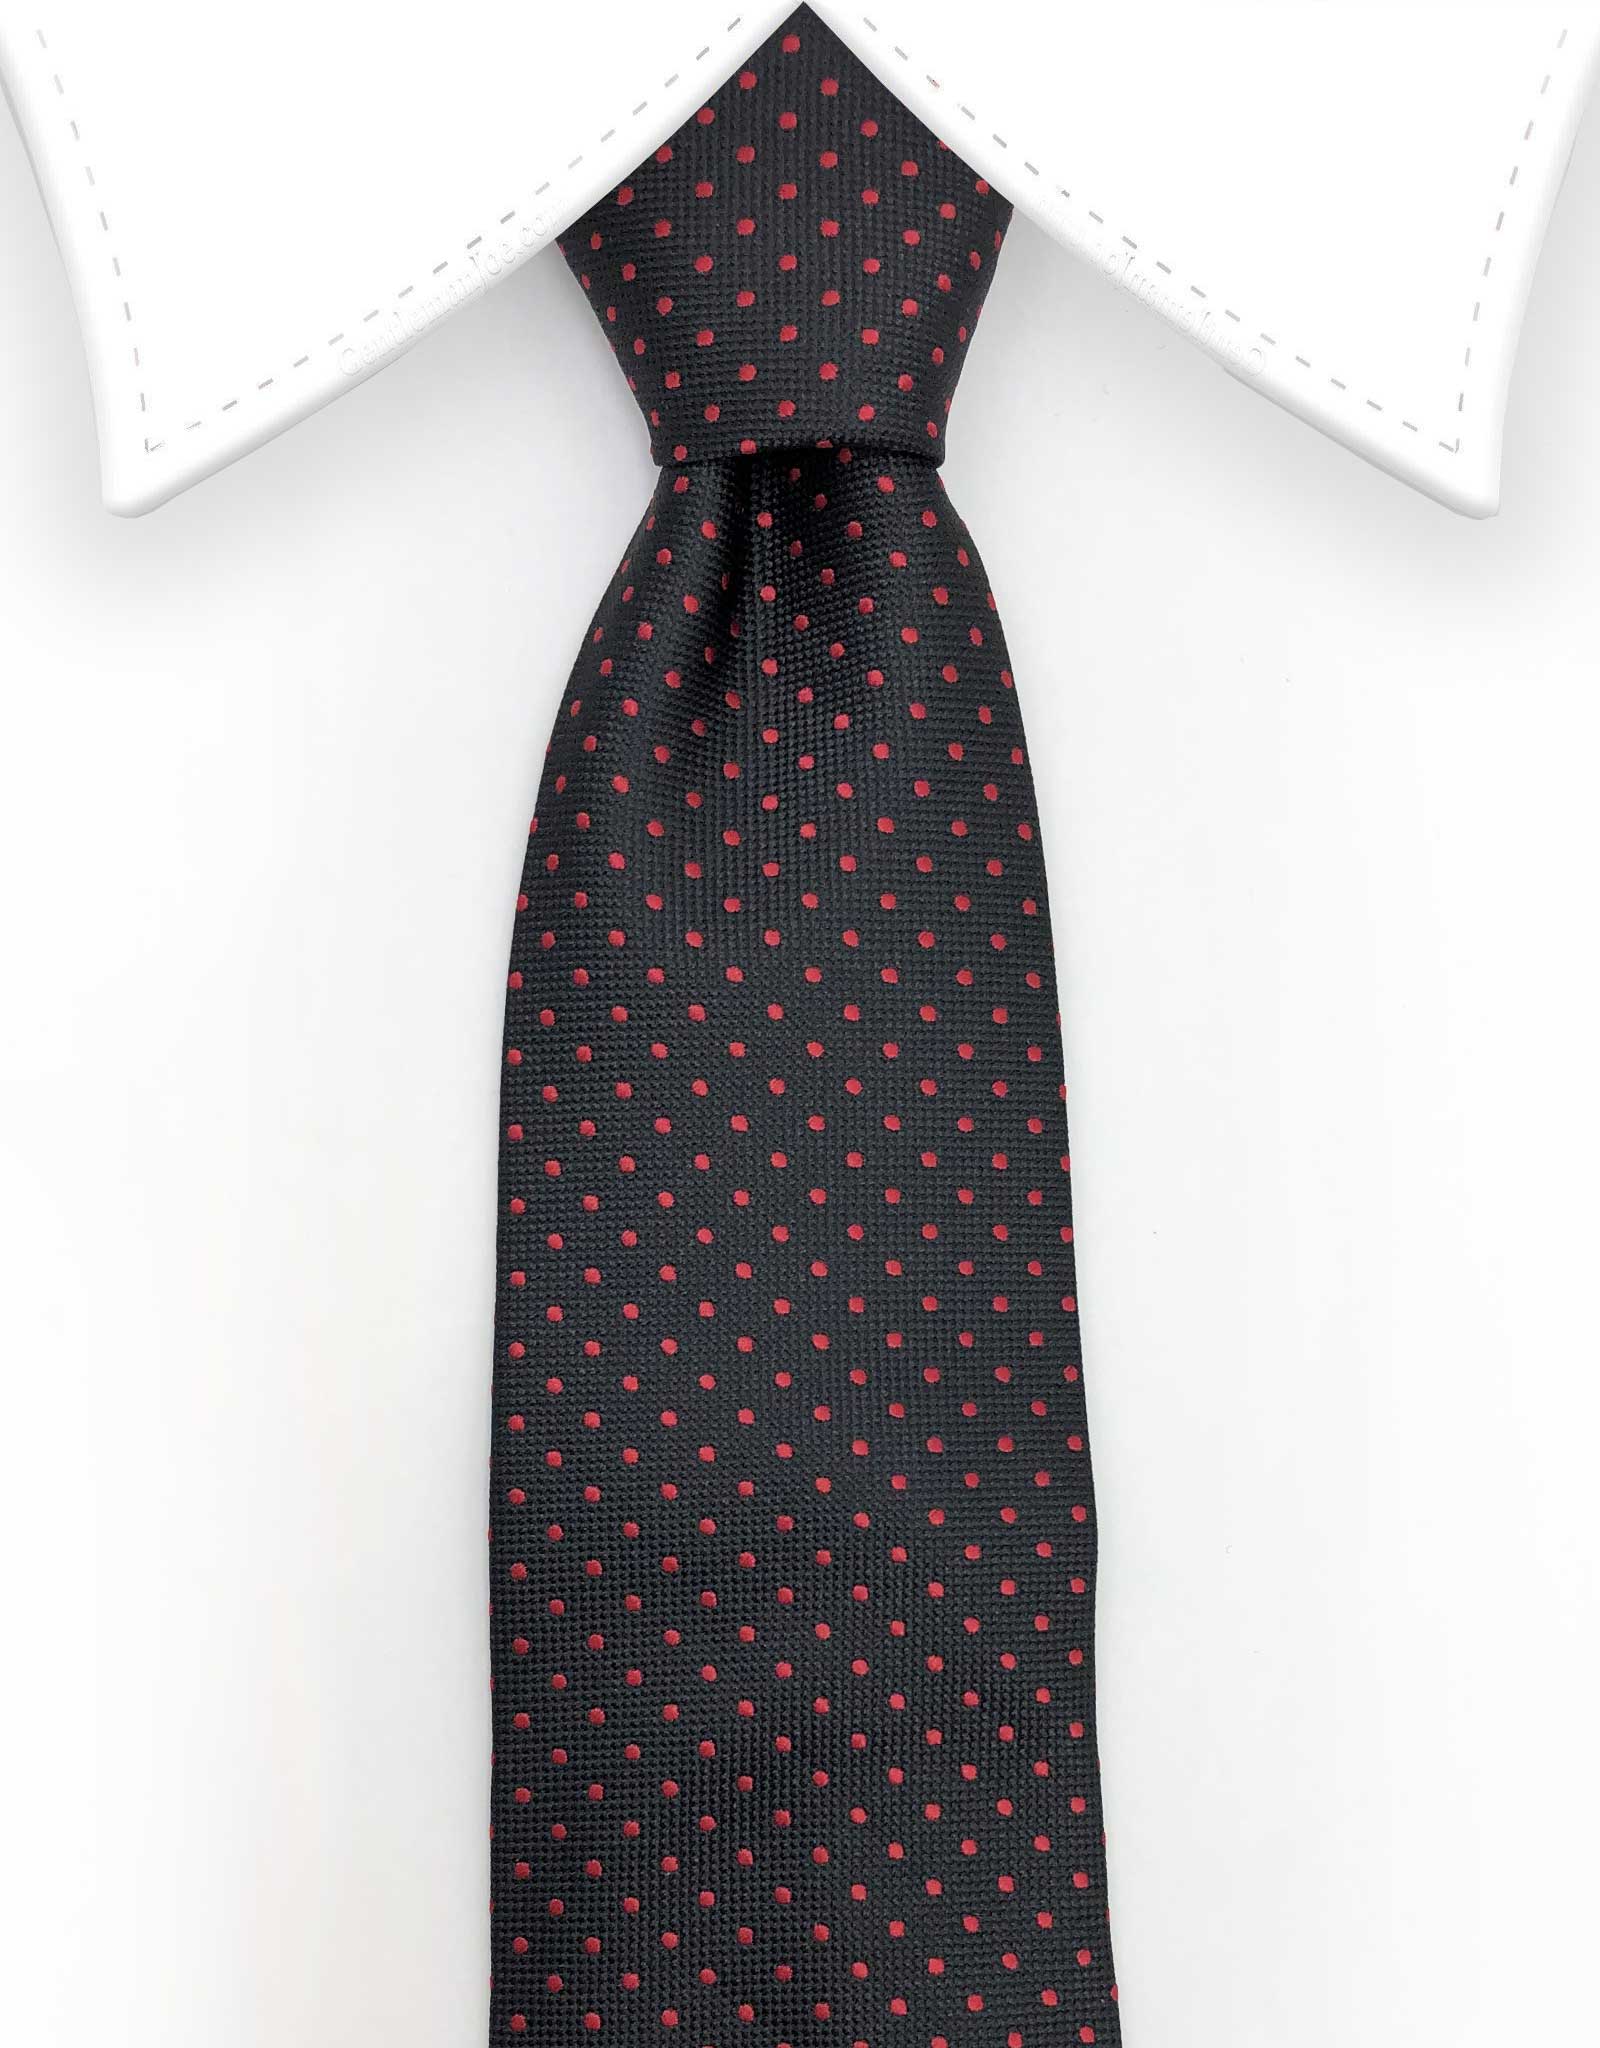 black tie with red dots